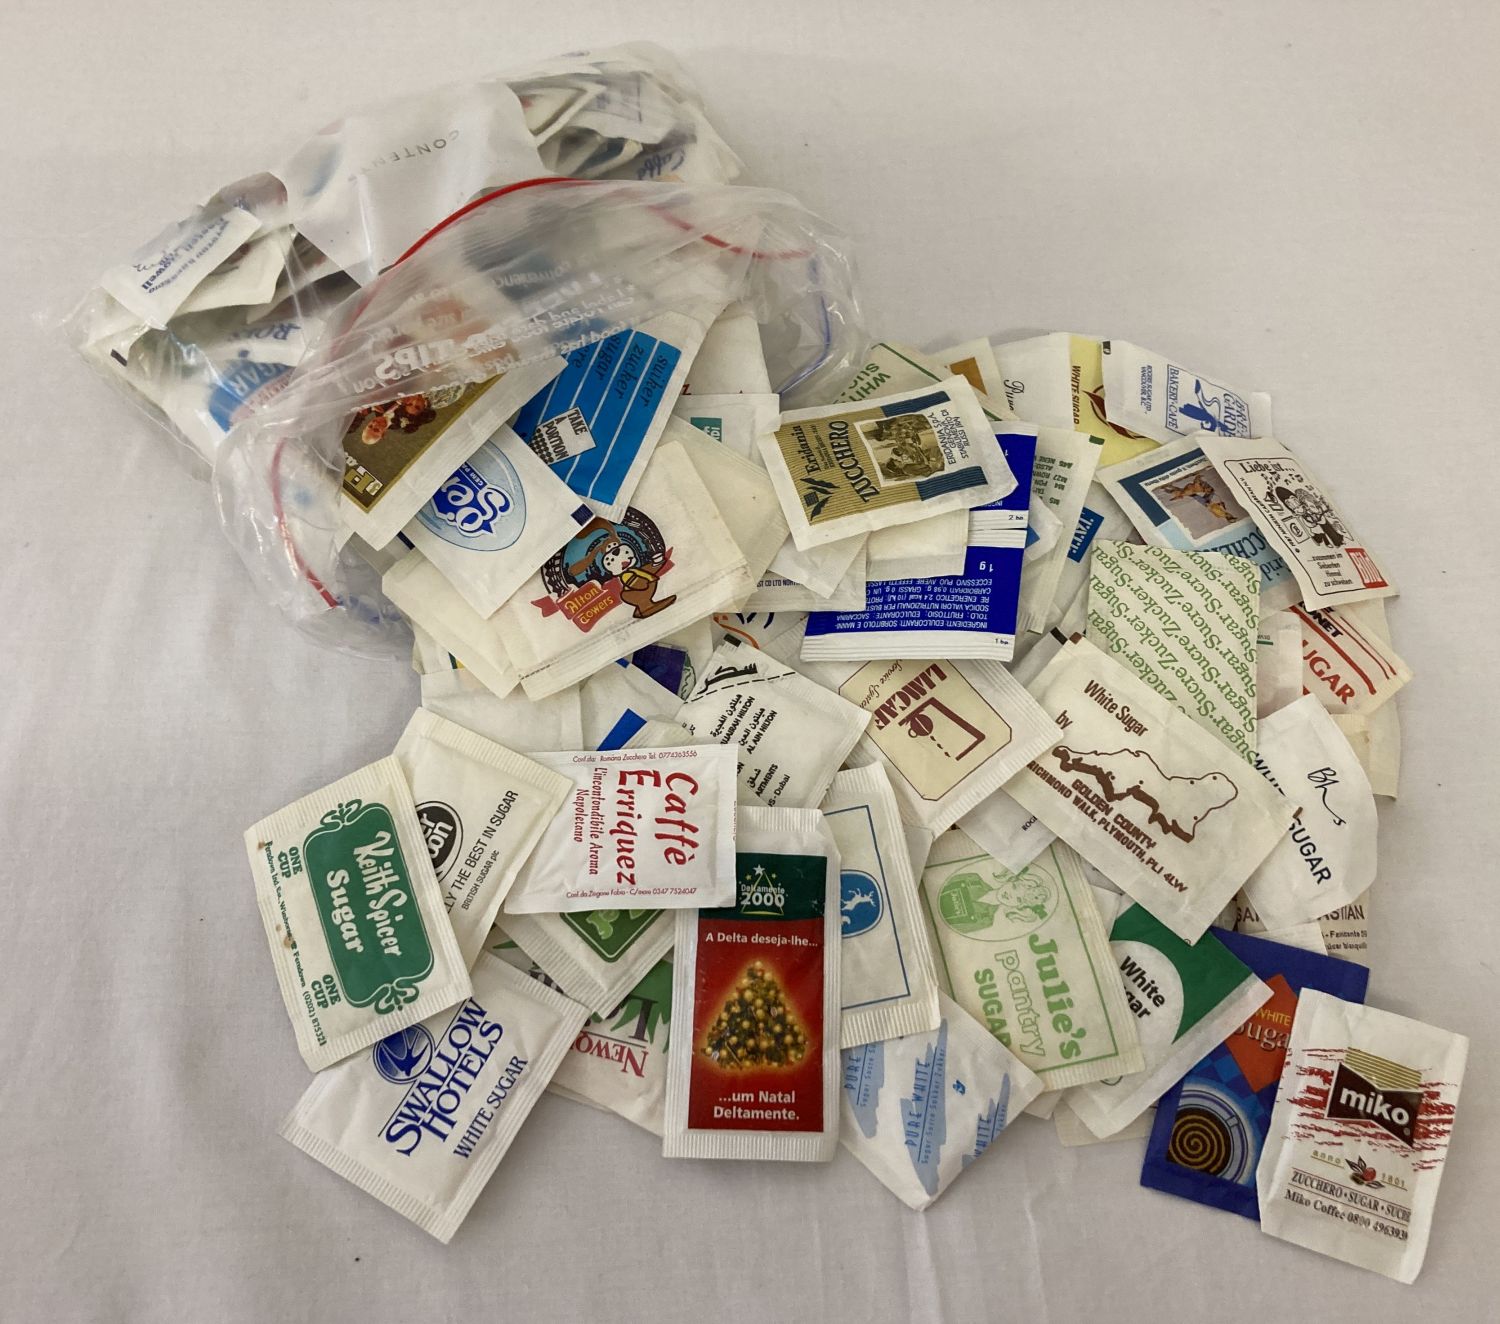 Sucrology collection - 4 boxes of vintage collectable sugar packets and sachets. - Image 7 of 8